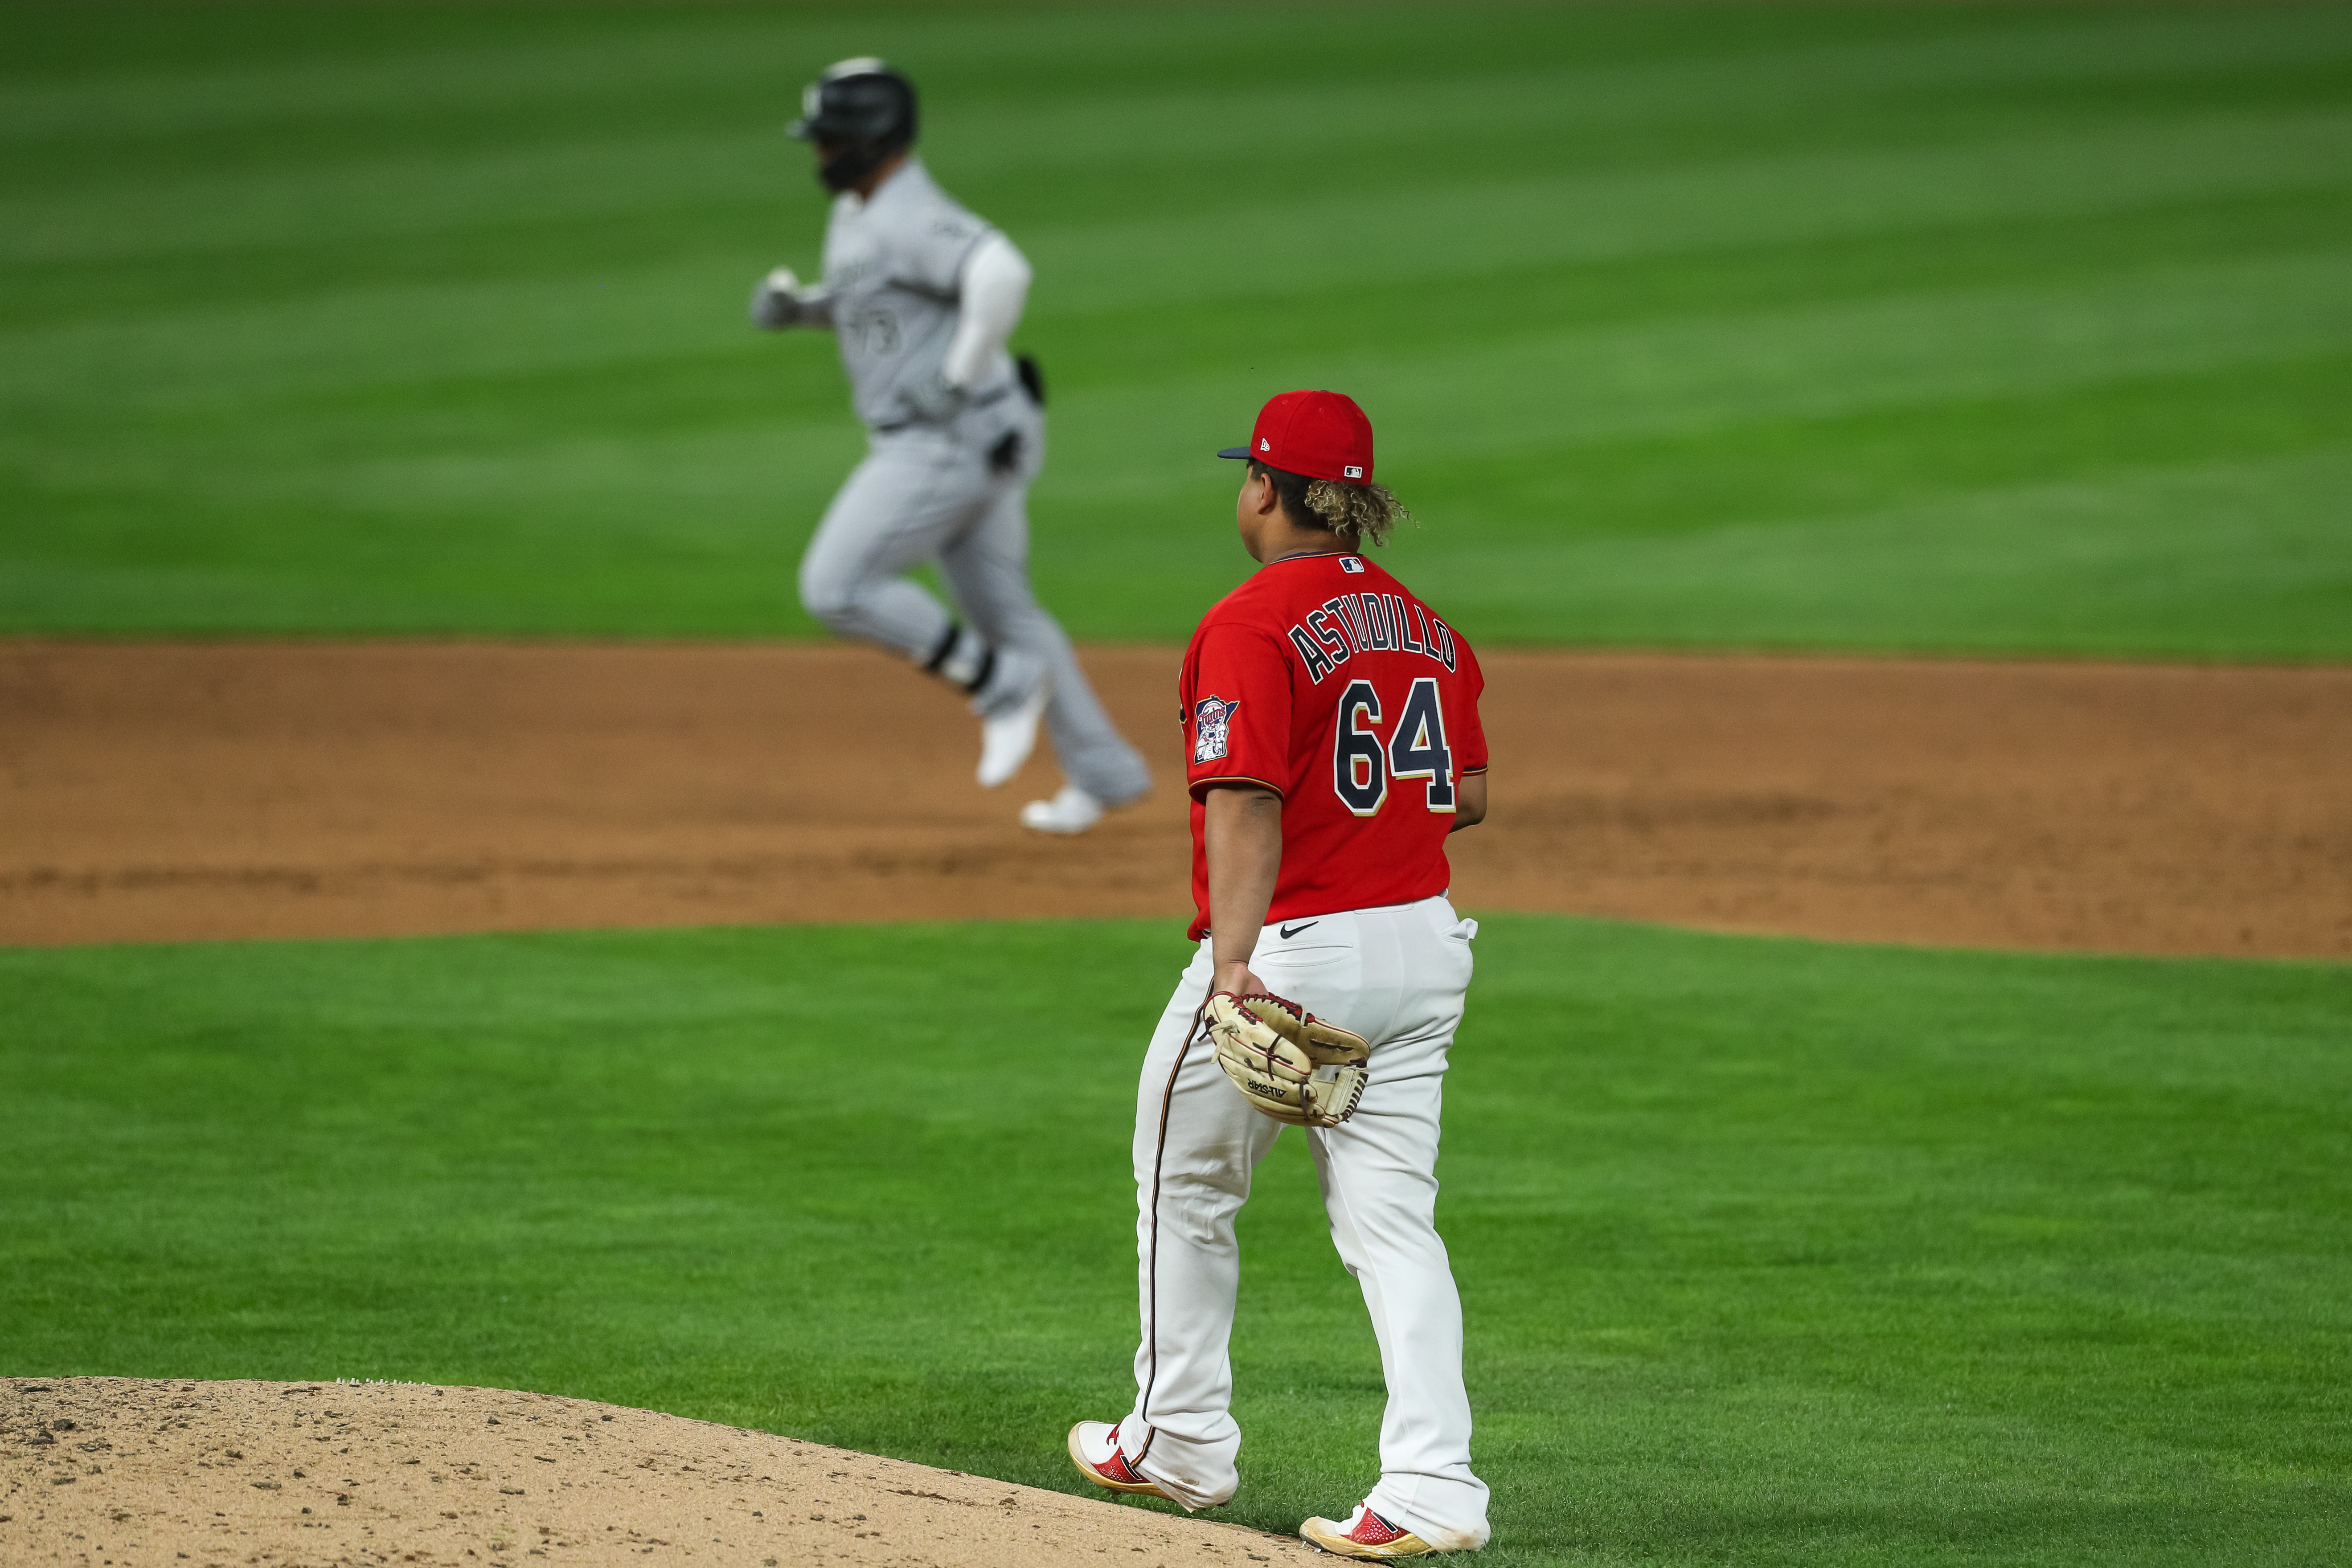 He made a mistake': Tony La Russa takes his own player to task for home run  in blowout - The Boston Globe